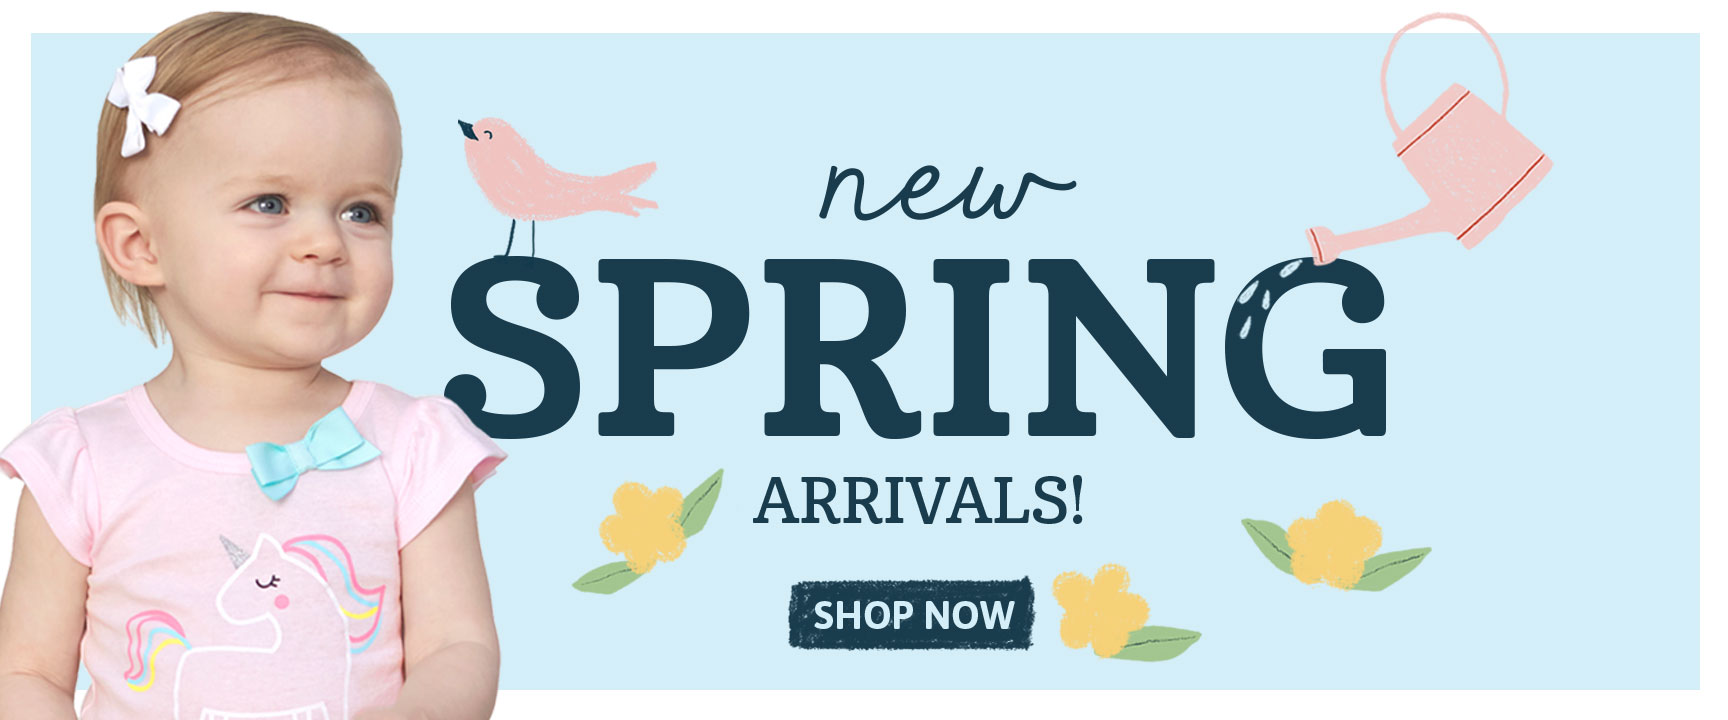 Shop Now for New Spring Arrivals